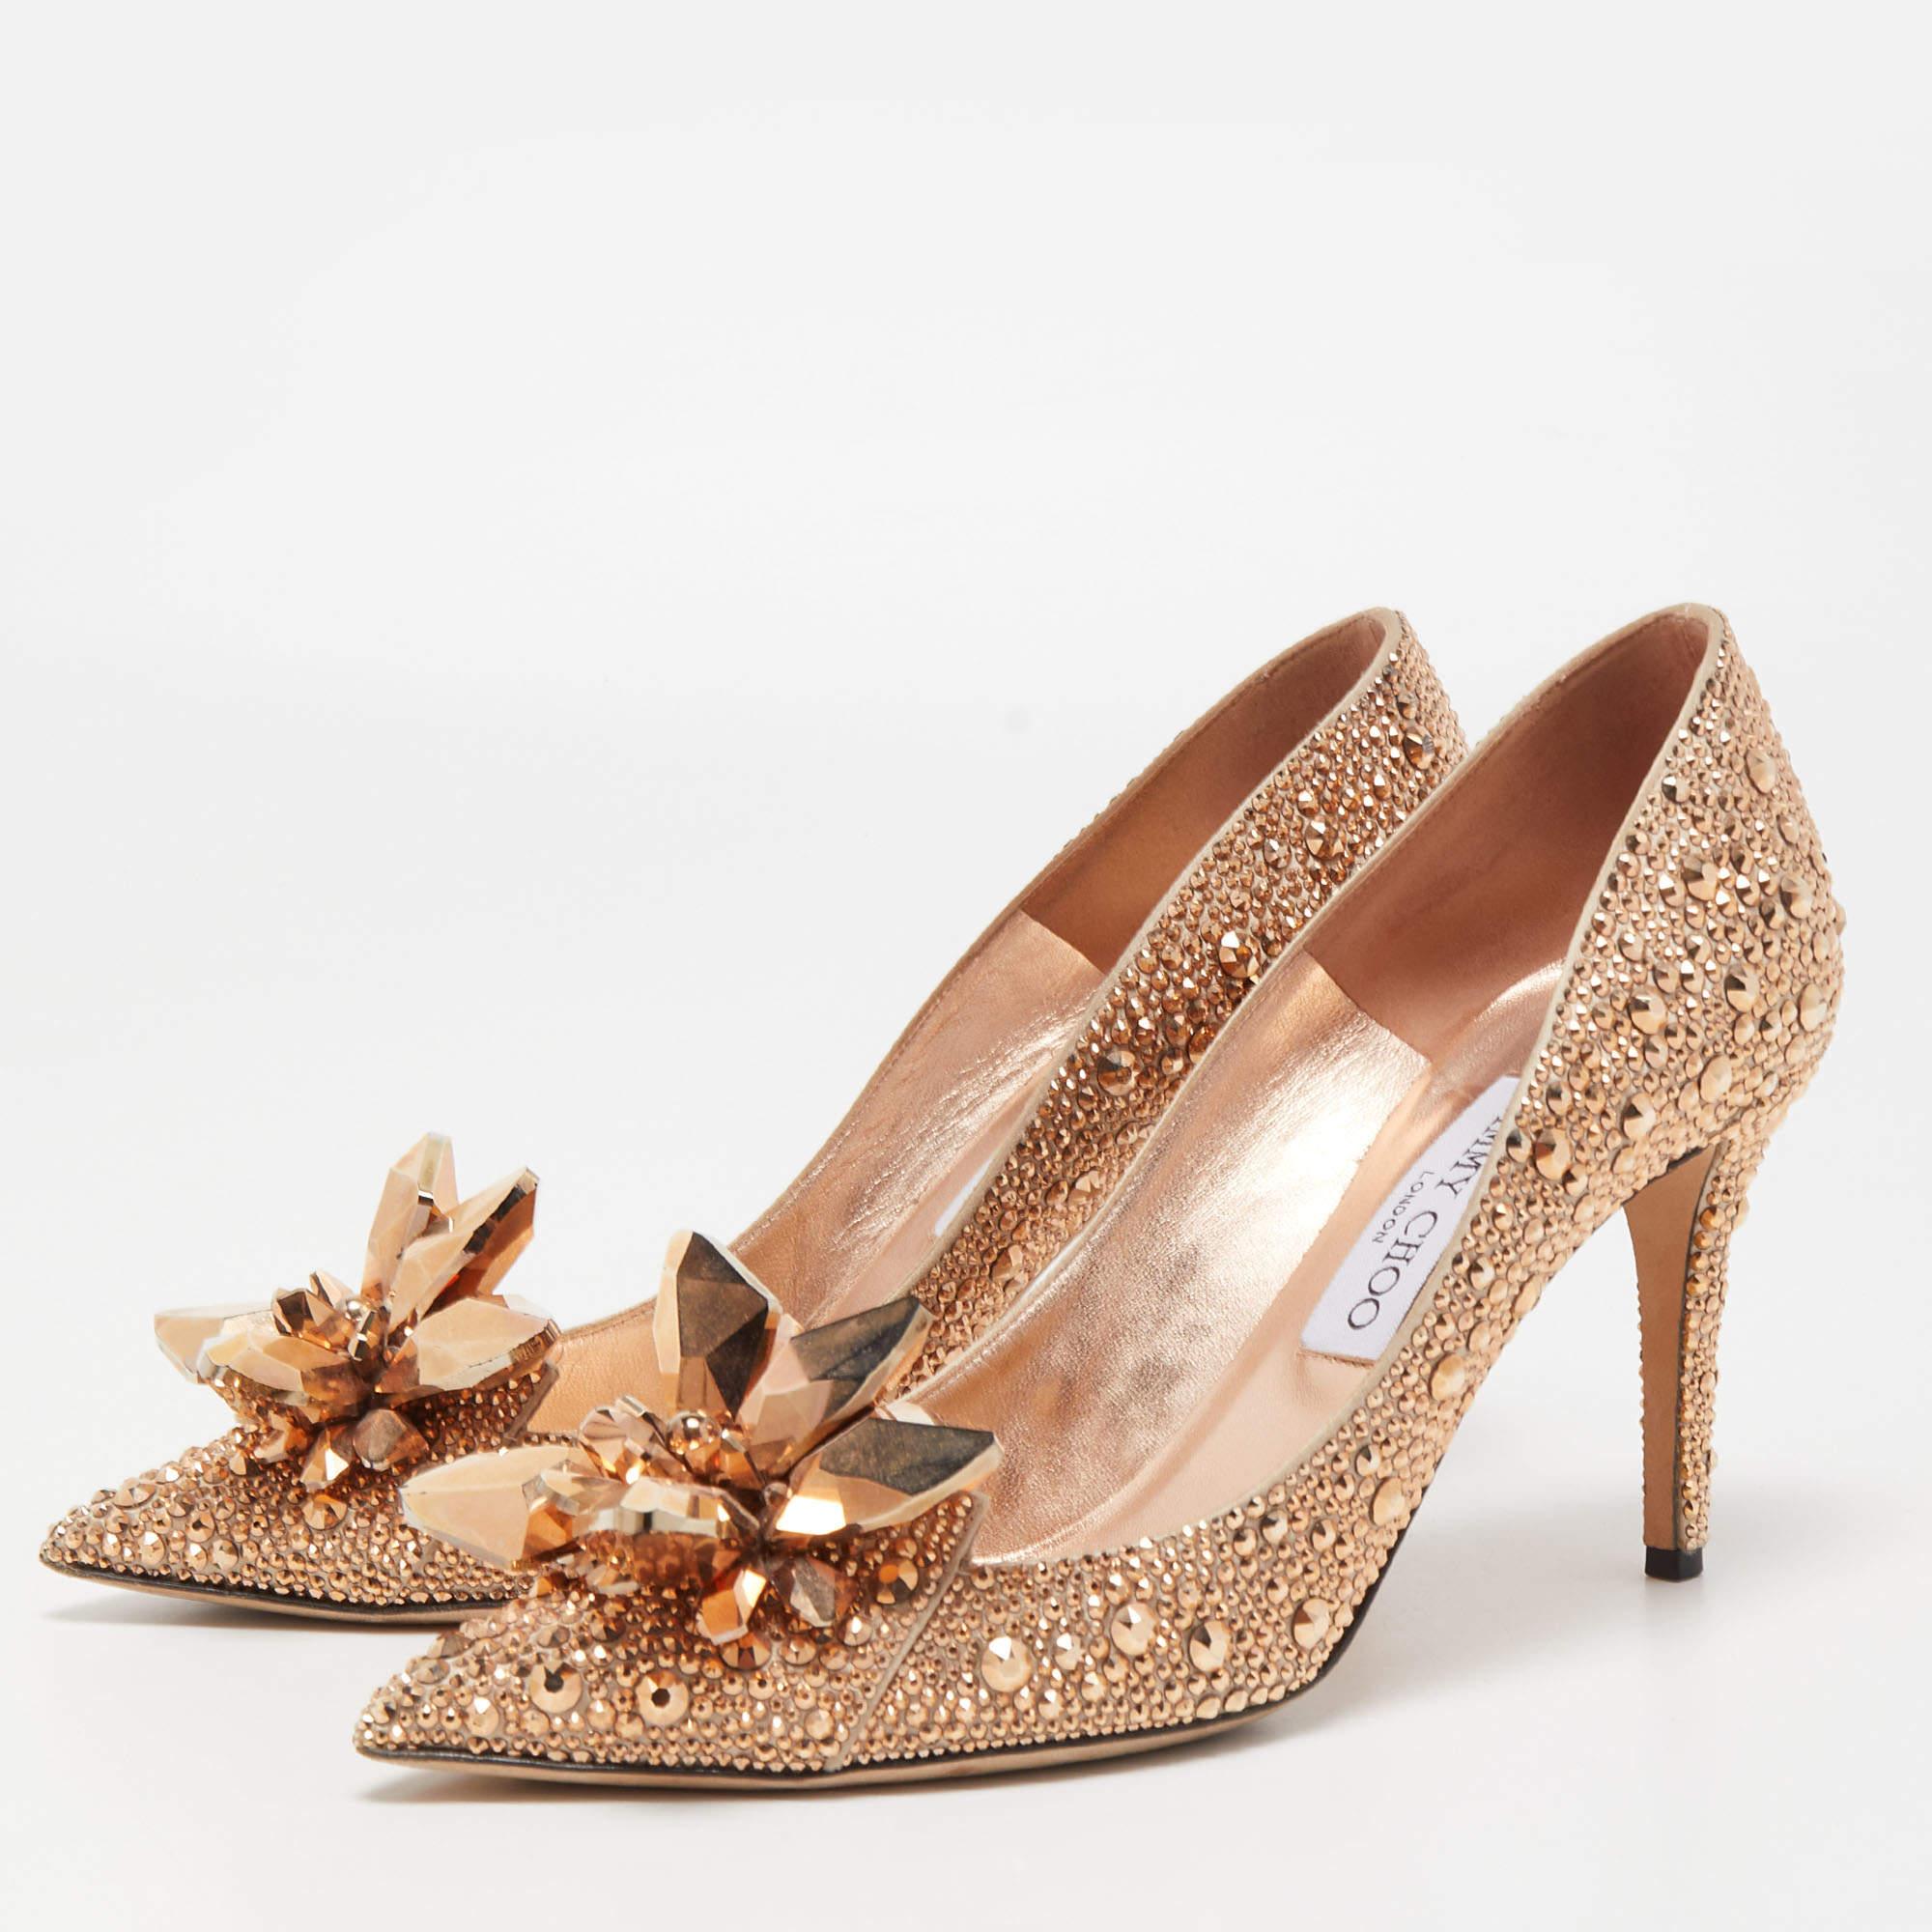 Deliver the most unforgettable looks with these pumps from Jimmy Choo! From their shape and detailing to their overall appeal, they are utterly mesmerizing. The pumps are crafted from crystals and satin. They are complete with comfortable insoles